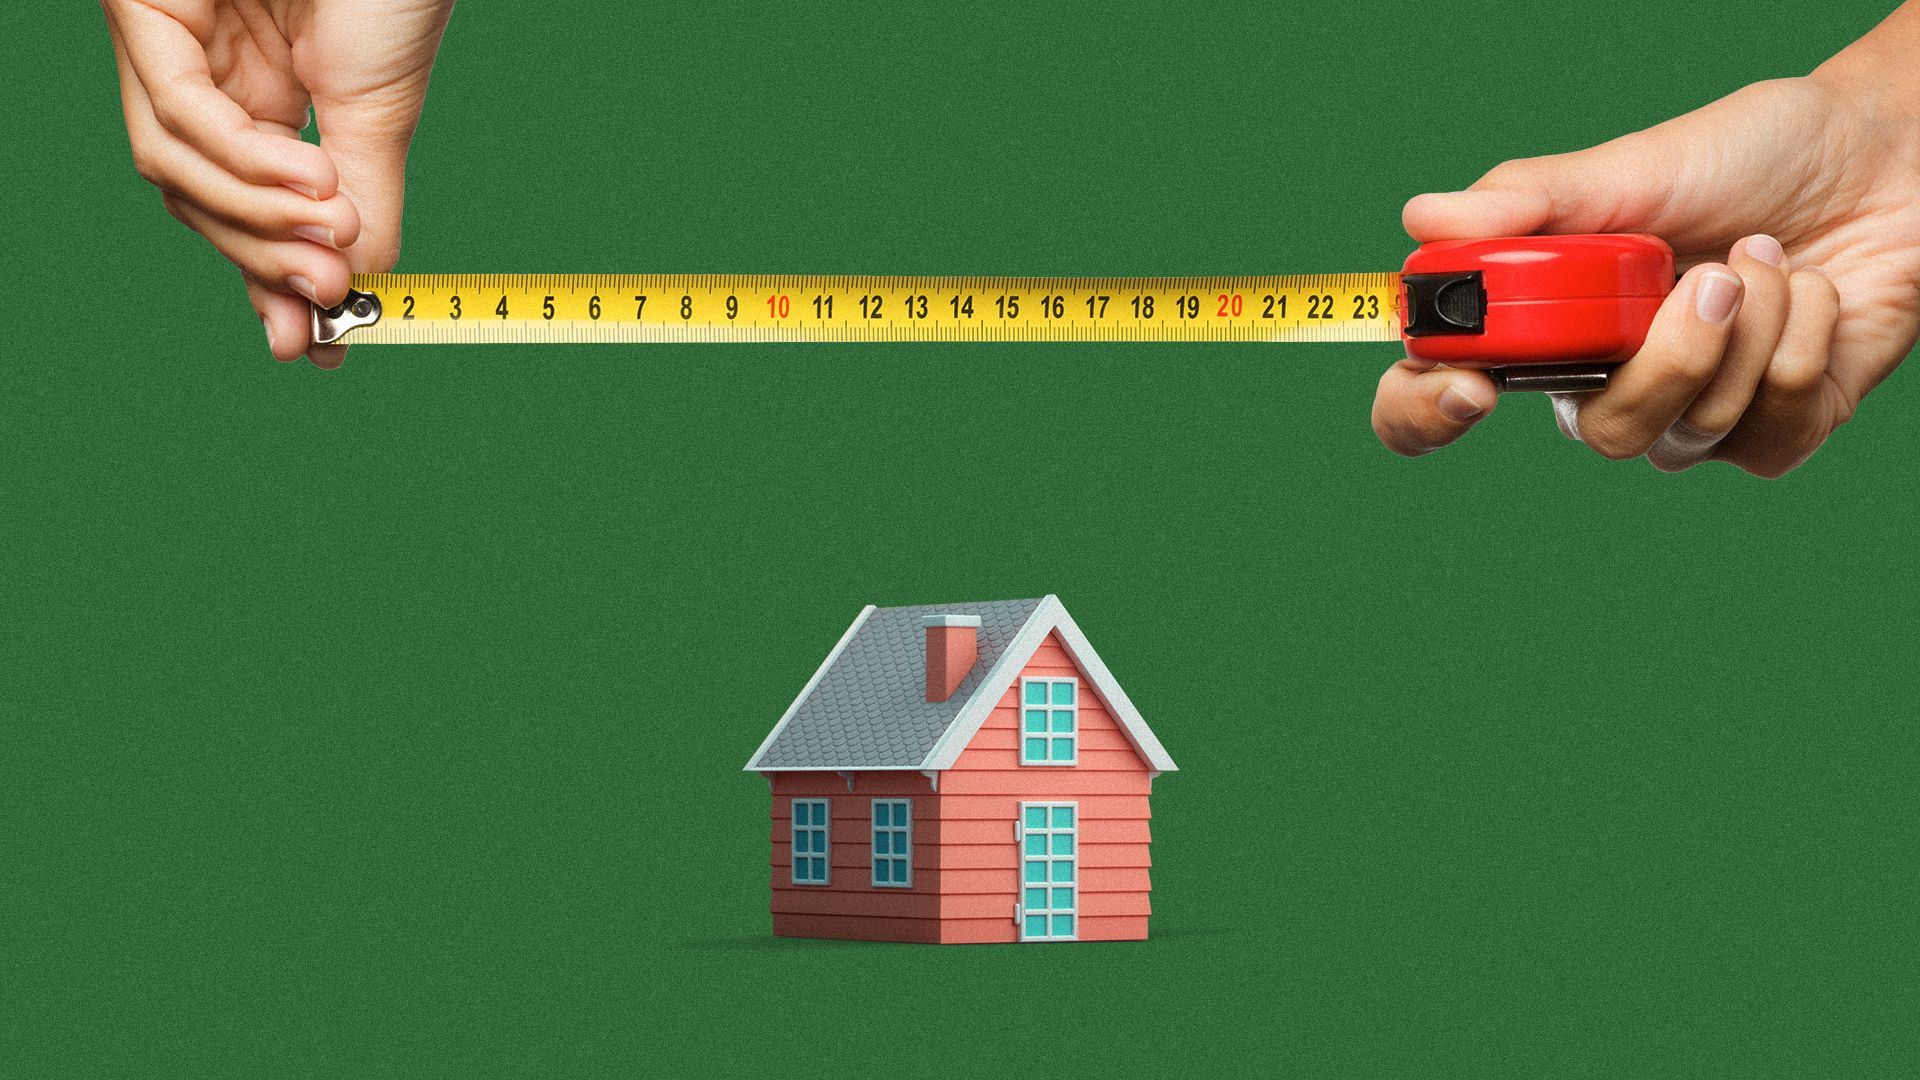 Illustration of a small house below a pair of hands holding measuring tape.